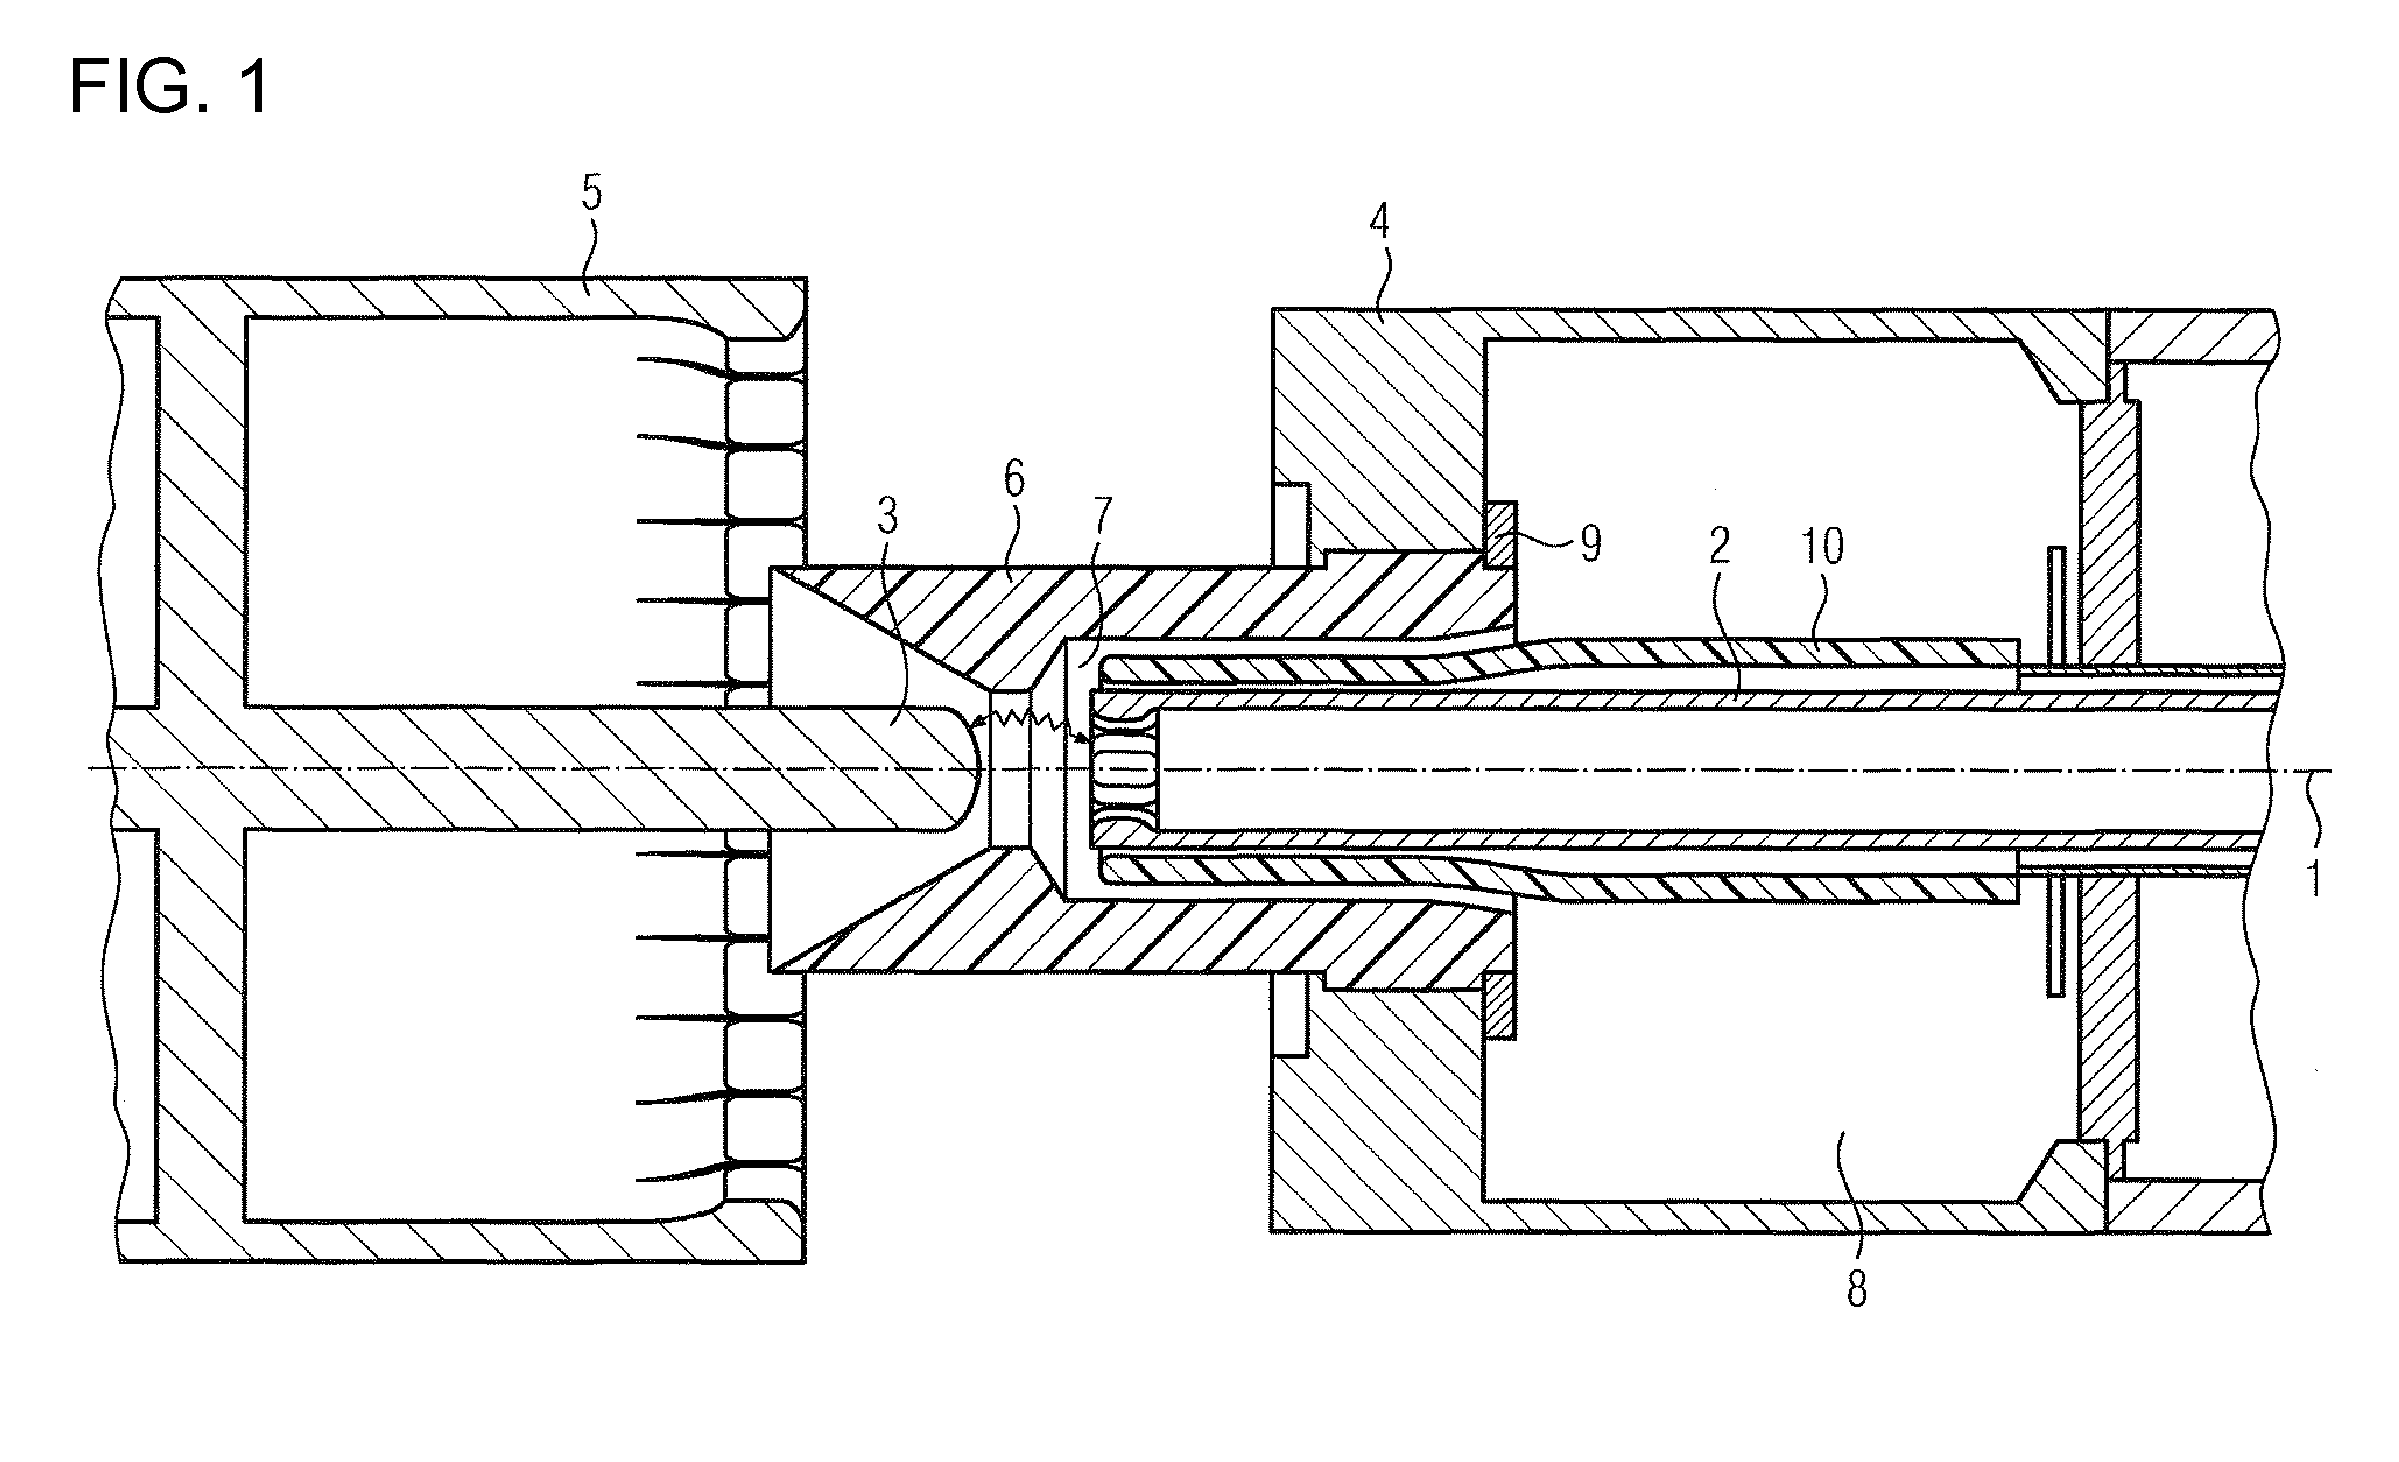 High-voltage power switch with a switch gap